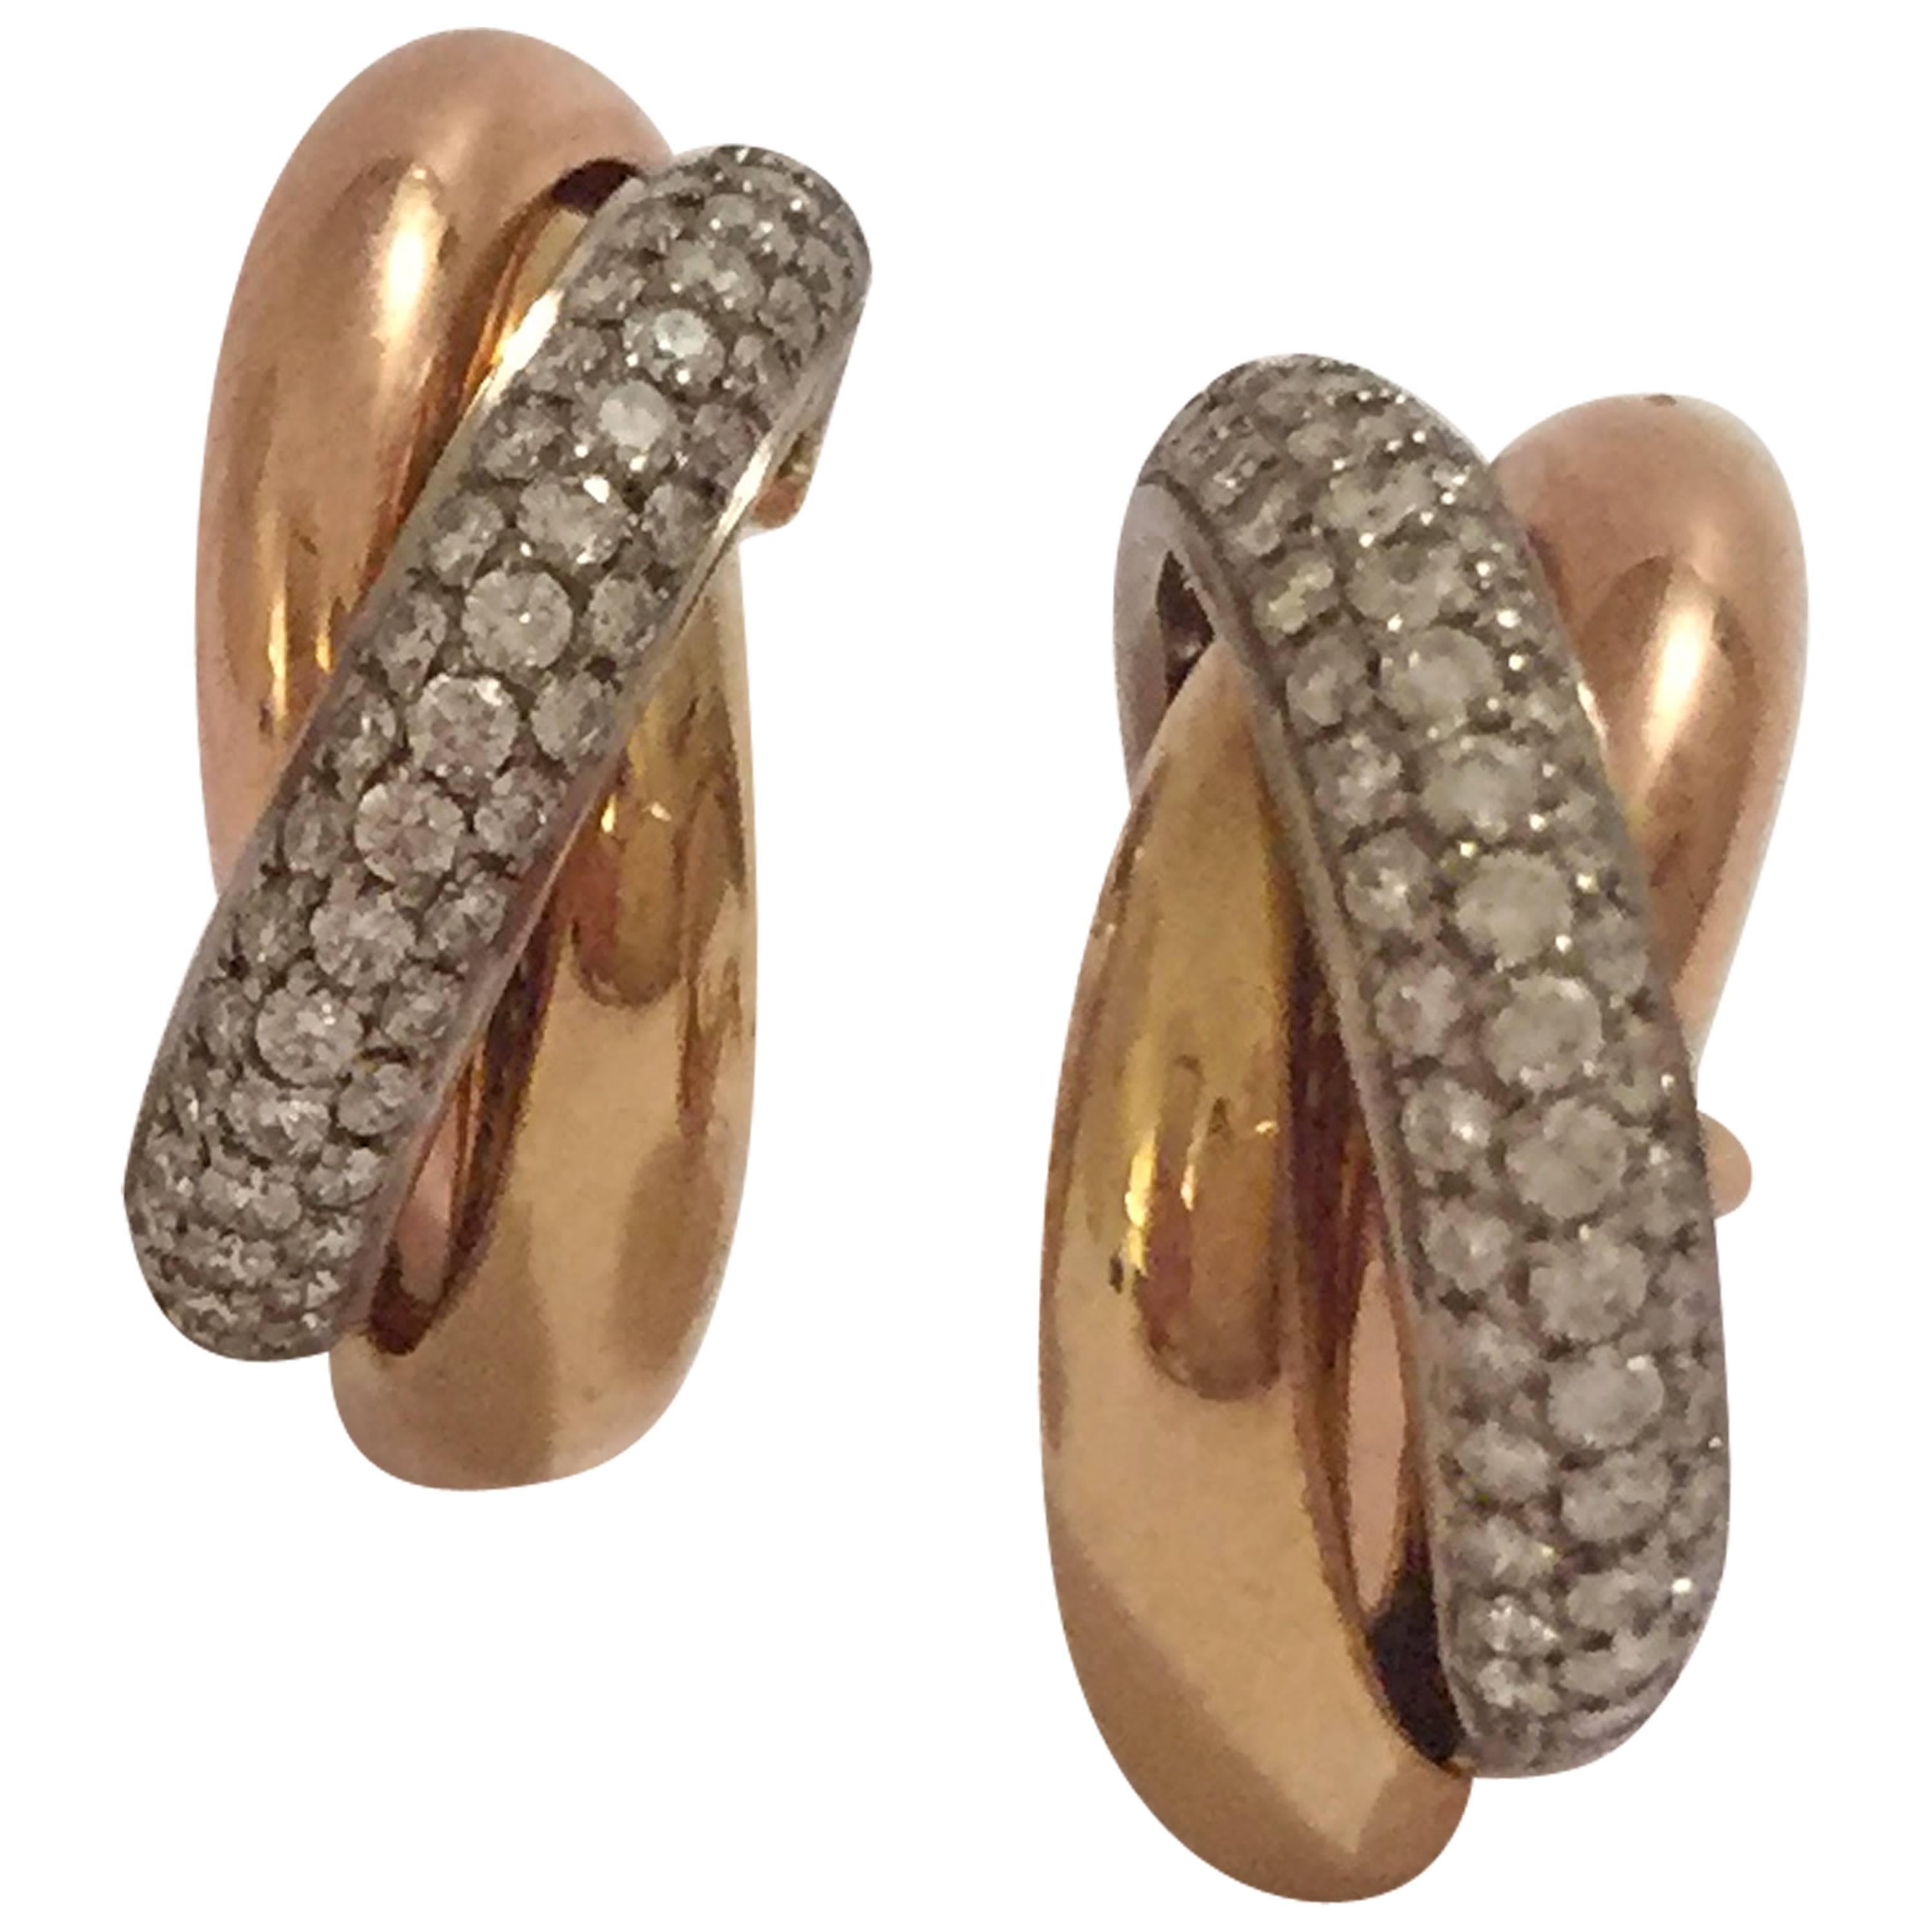 18kt Cartier De Trinity Three Row Hoop Earring with Diamonds.  Yellow white and rose gold hoops complemented with a a diamonds row of approximately 70 diamonds weighing approximately 0.50 carats.

The earrings are pierced and finished with an